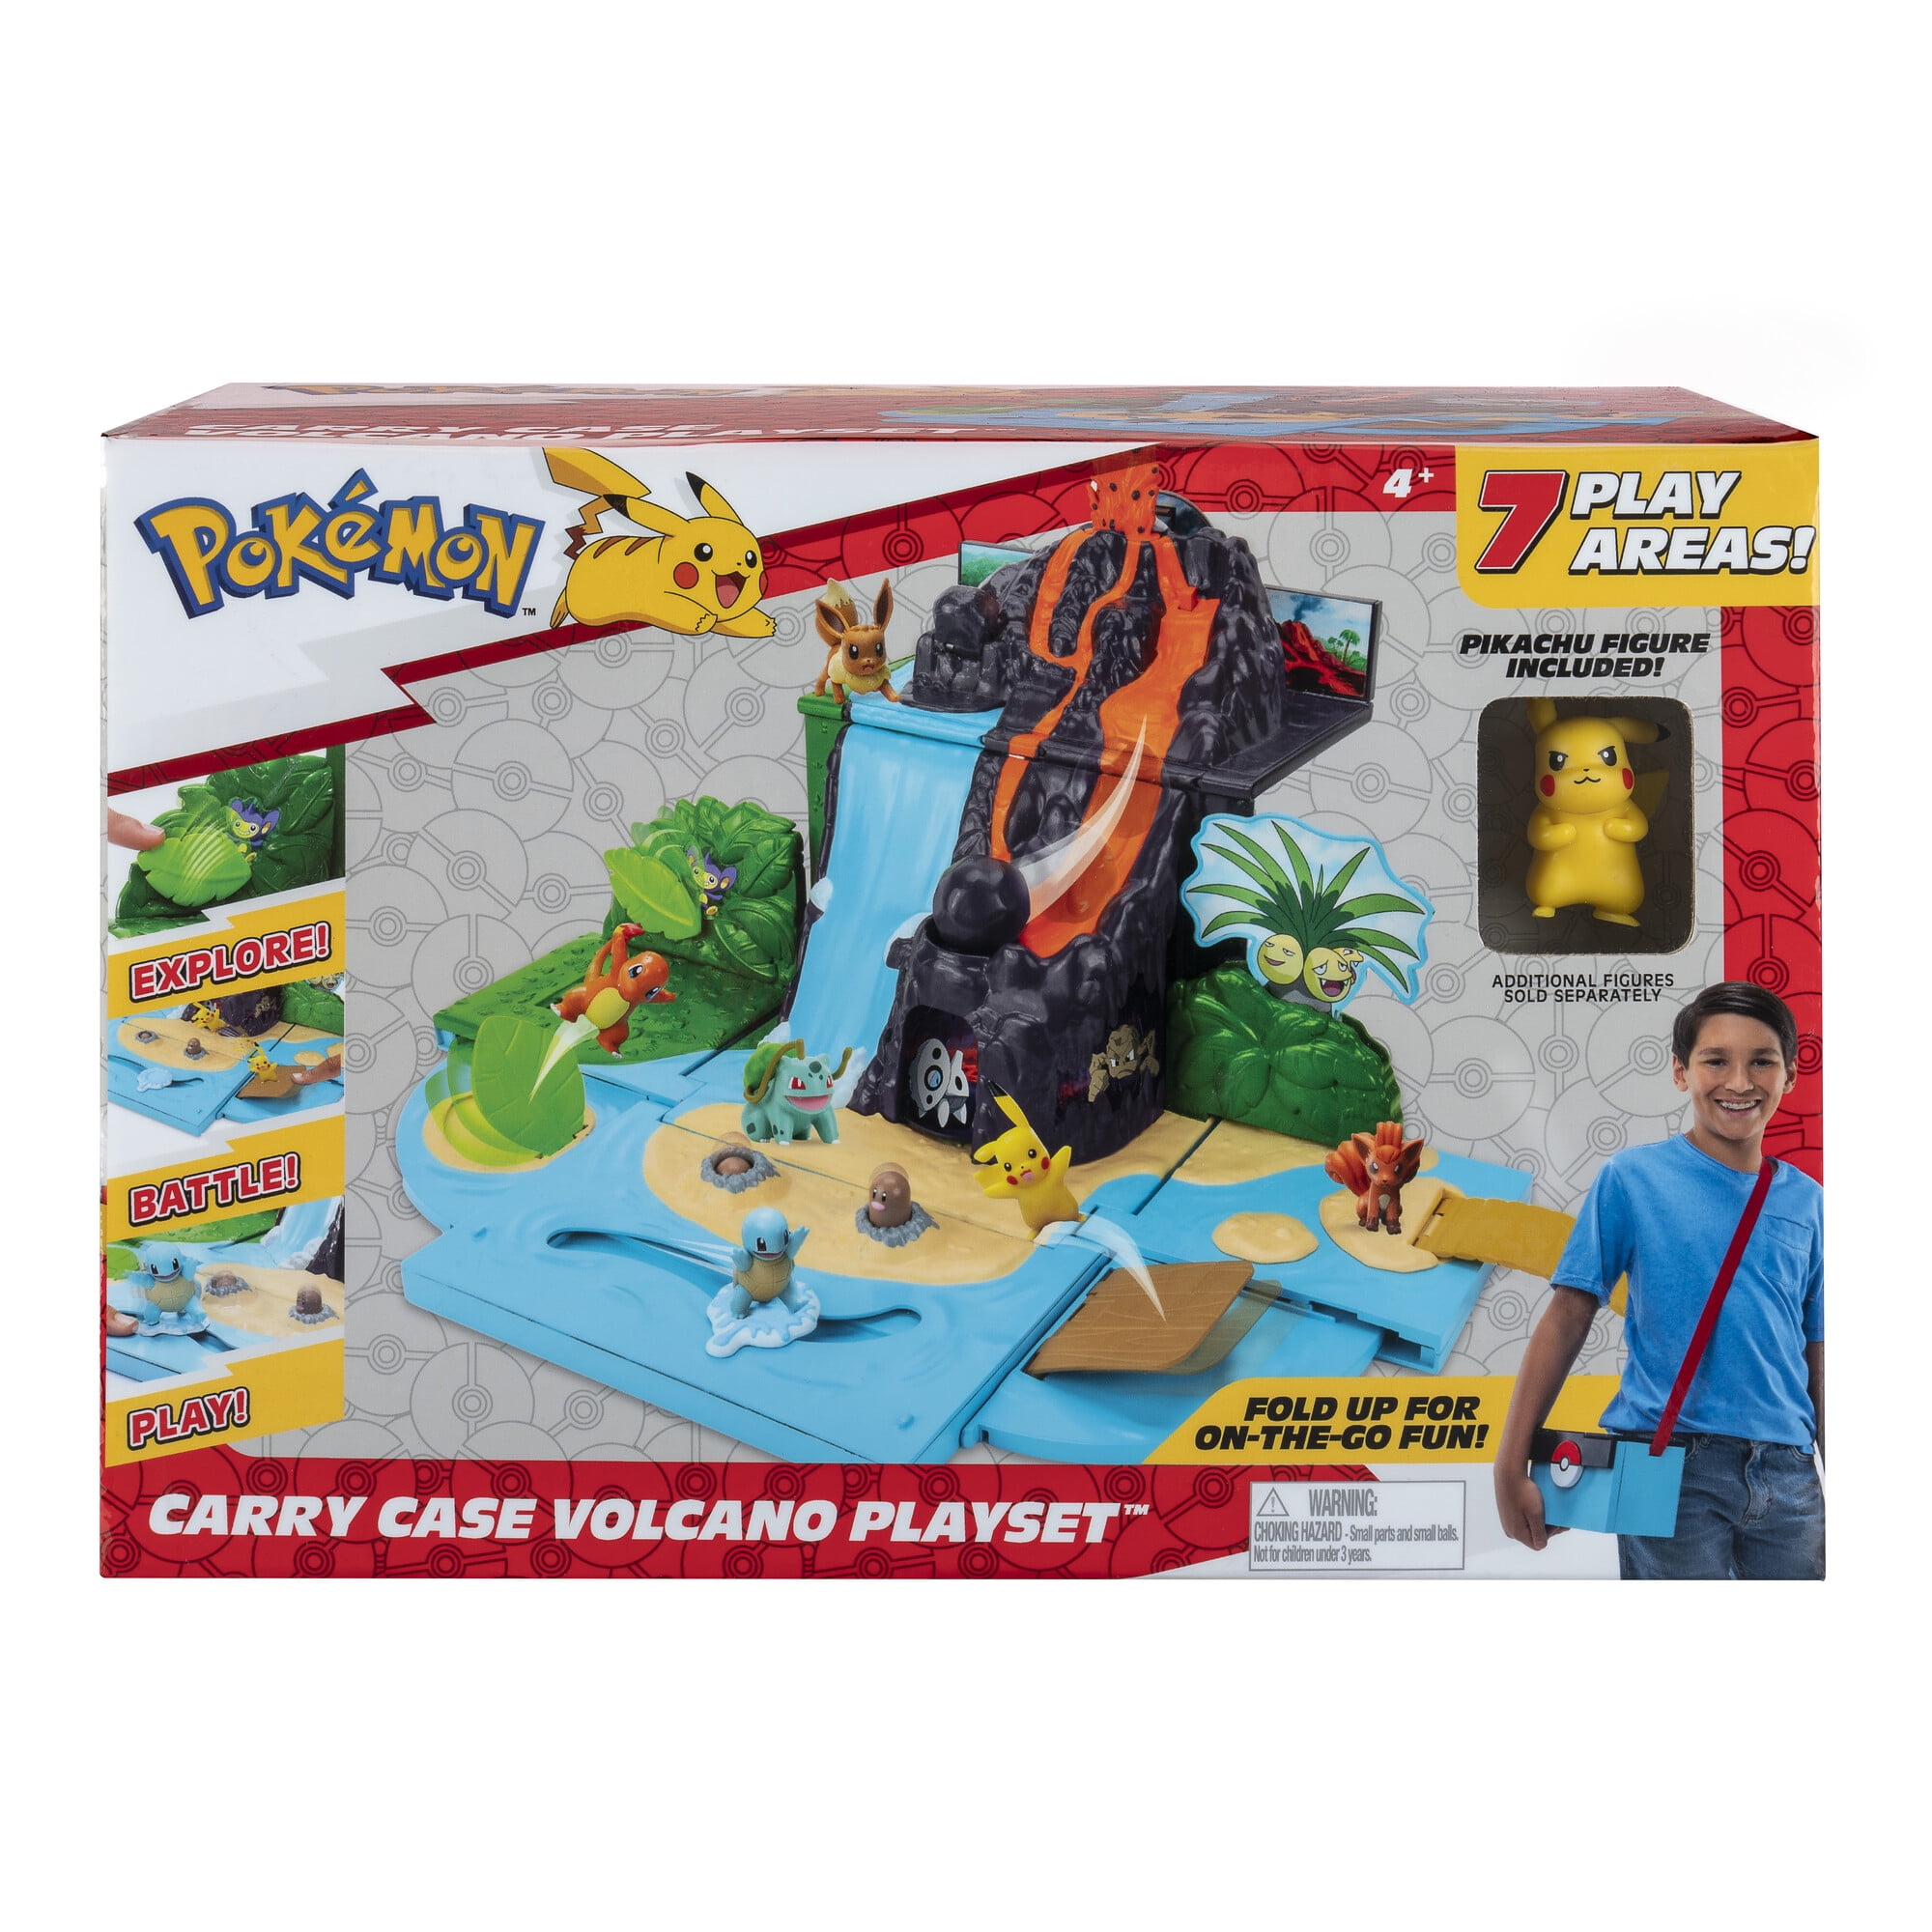 Green Plastic Pokemon Backpack Carrying Case Playset